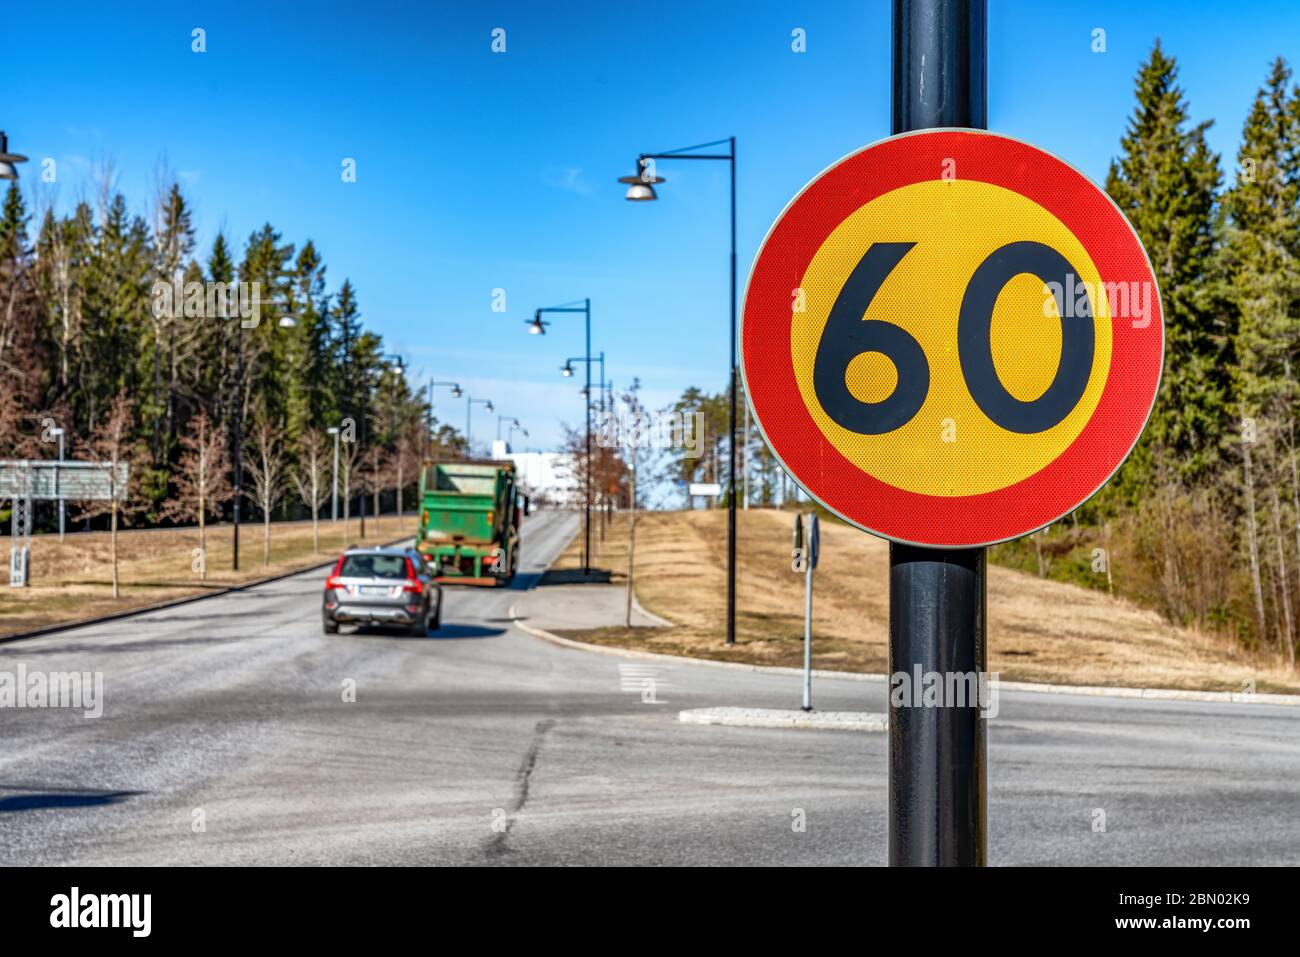 Beautiful close up photo of fresh 60 km speed limit traffic sign mounted on black pole. Blurry background with one car and truck driving on leading to Stock Photo